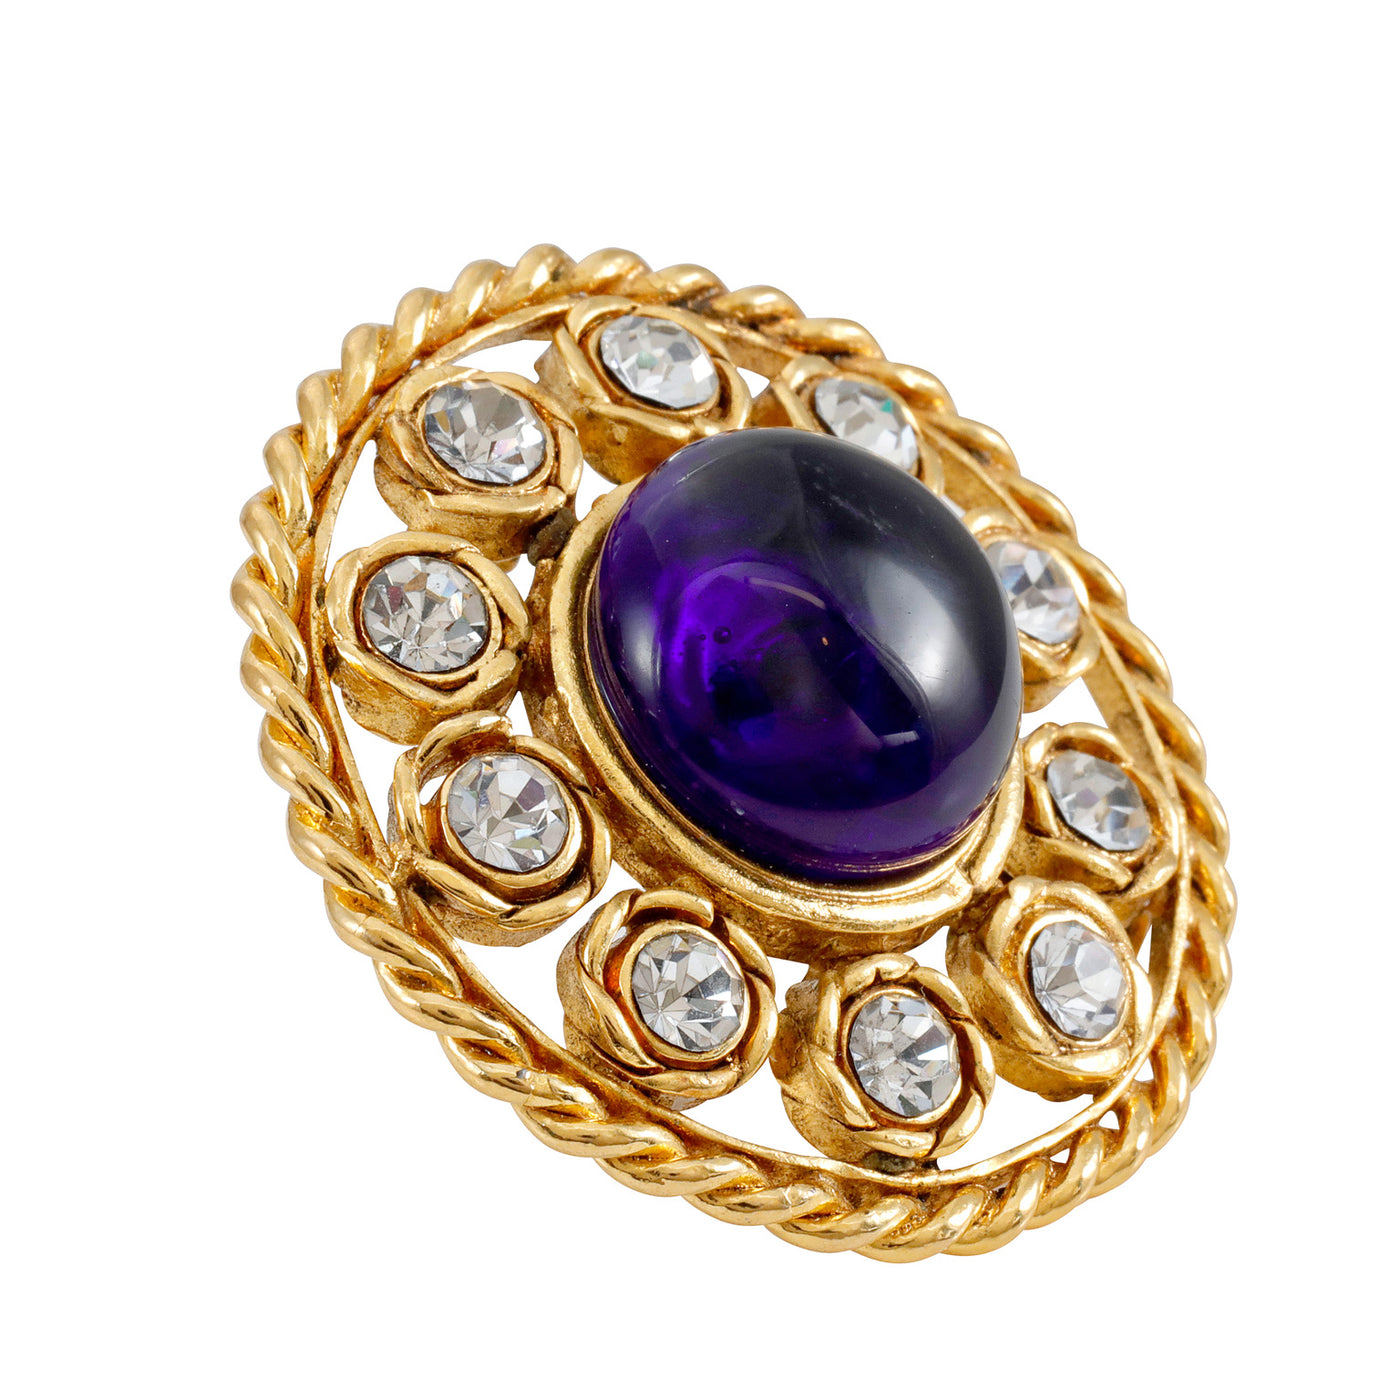 Chanel Vintage Blue Gripoix Brooch Pendant with Gold and Crystal Surround